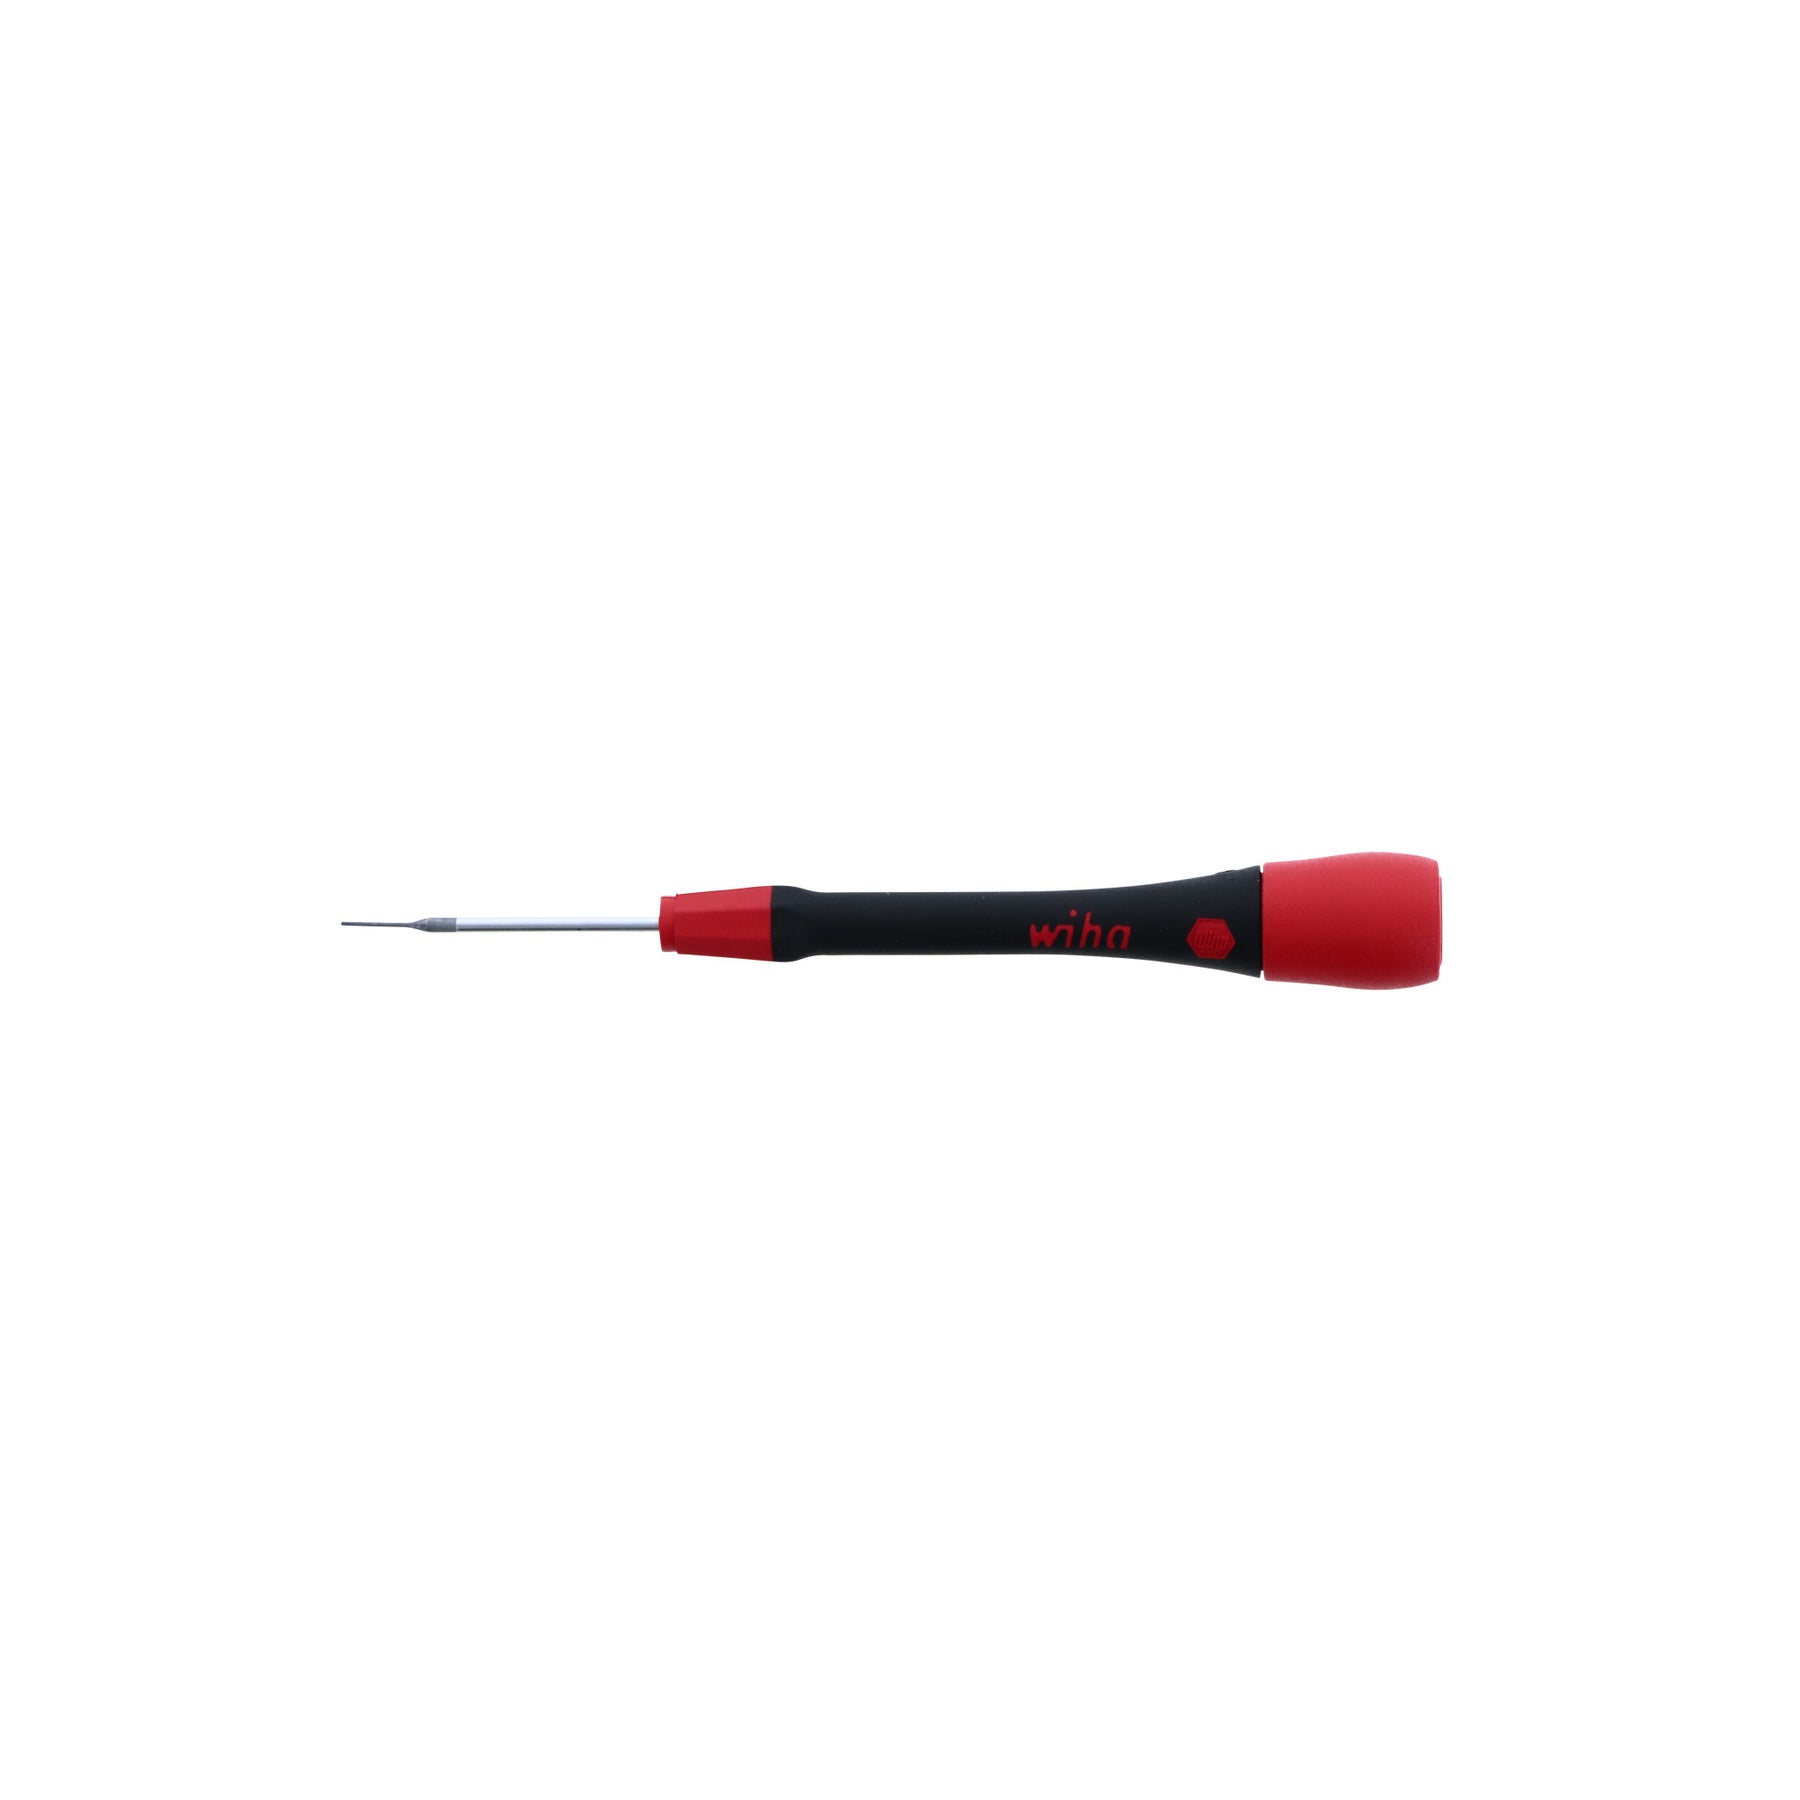 PicoFinish Slotted Screwdriver .8mm x 40mm